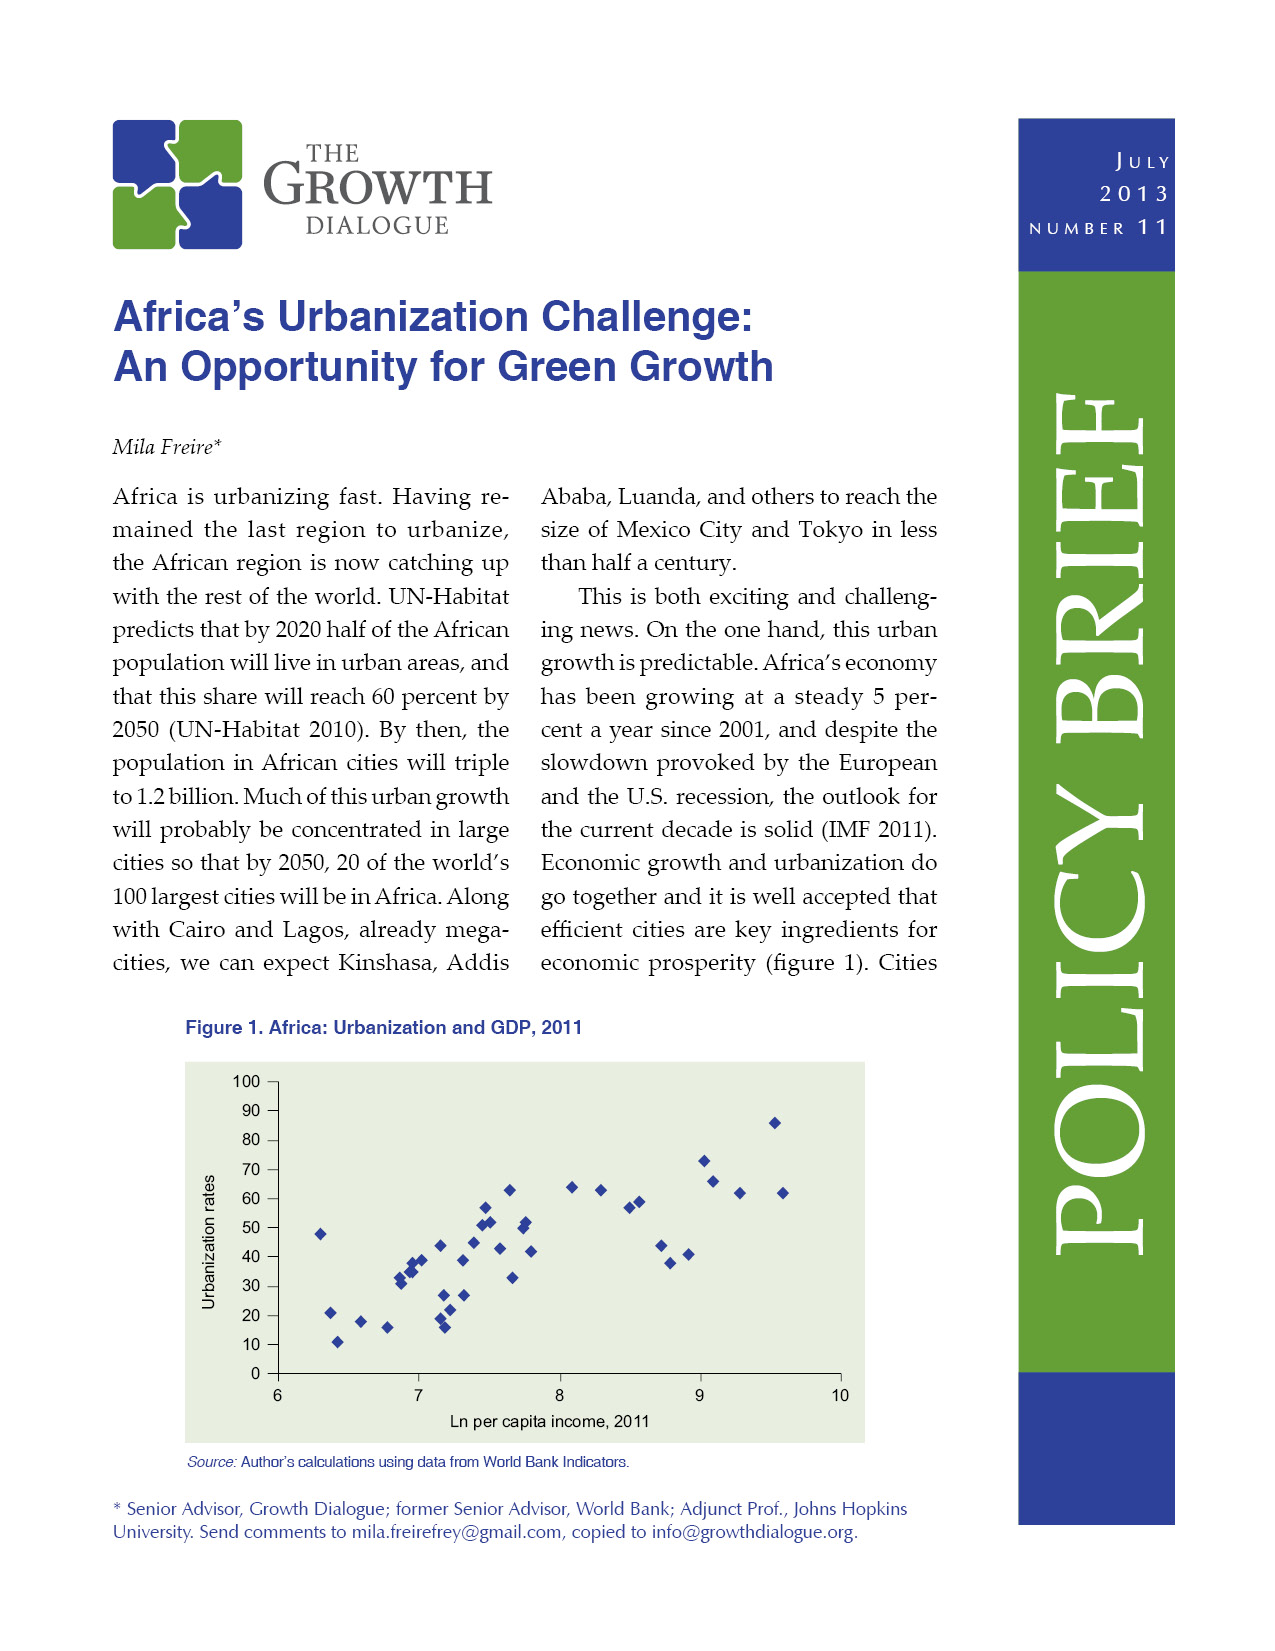 Africa’s Urbanization Challenge: An Opportunity for Green Growth